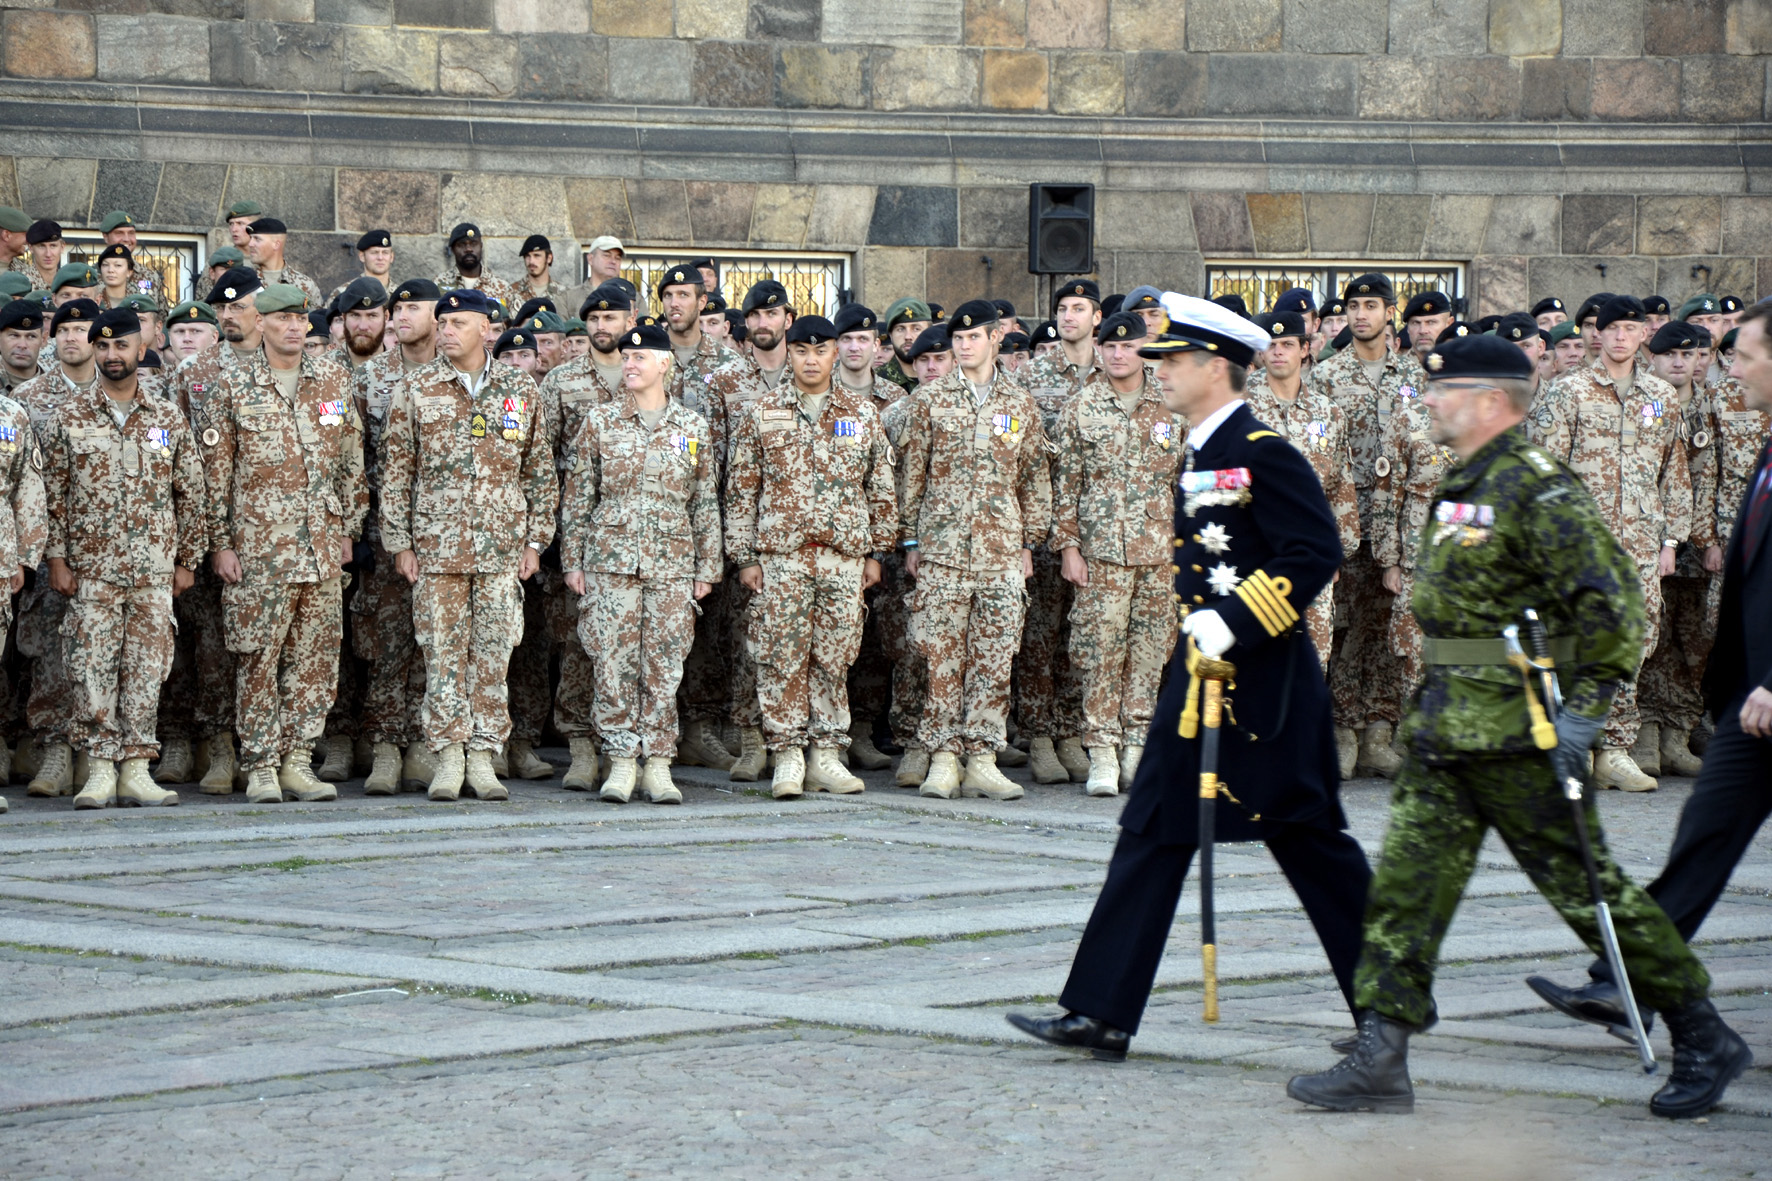 DANCON ISAF 13 is inspected by His Royal Highness Crown Prince Frederik accompanied by the chief of the Royal Guard, Commandant of Copenhagen, colonel, Chamberlain Lasse Harkjær, Christiansborg Slotsplads. Photo by Thomas Randrup Pedersen